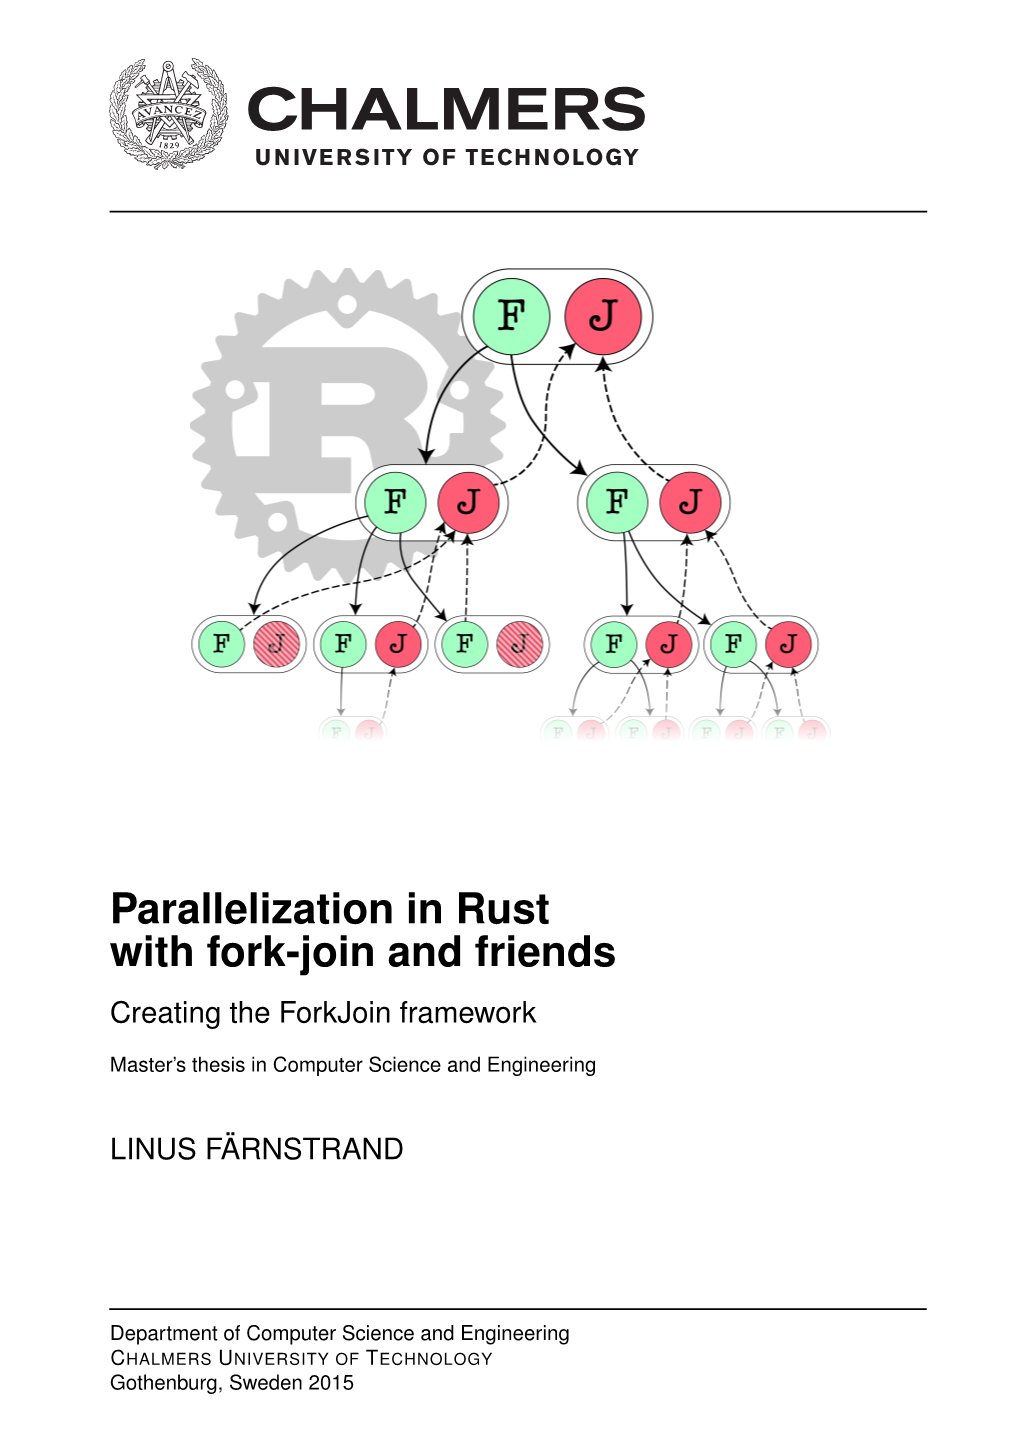 Parallelization in Rust with Fork-Join and Friends Creating the Forkjoin Framework